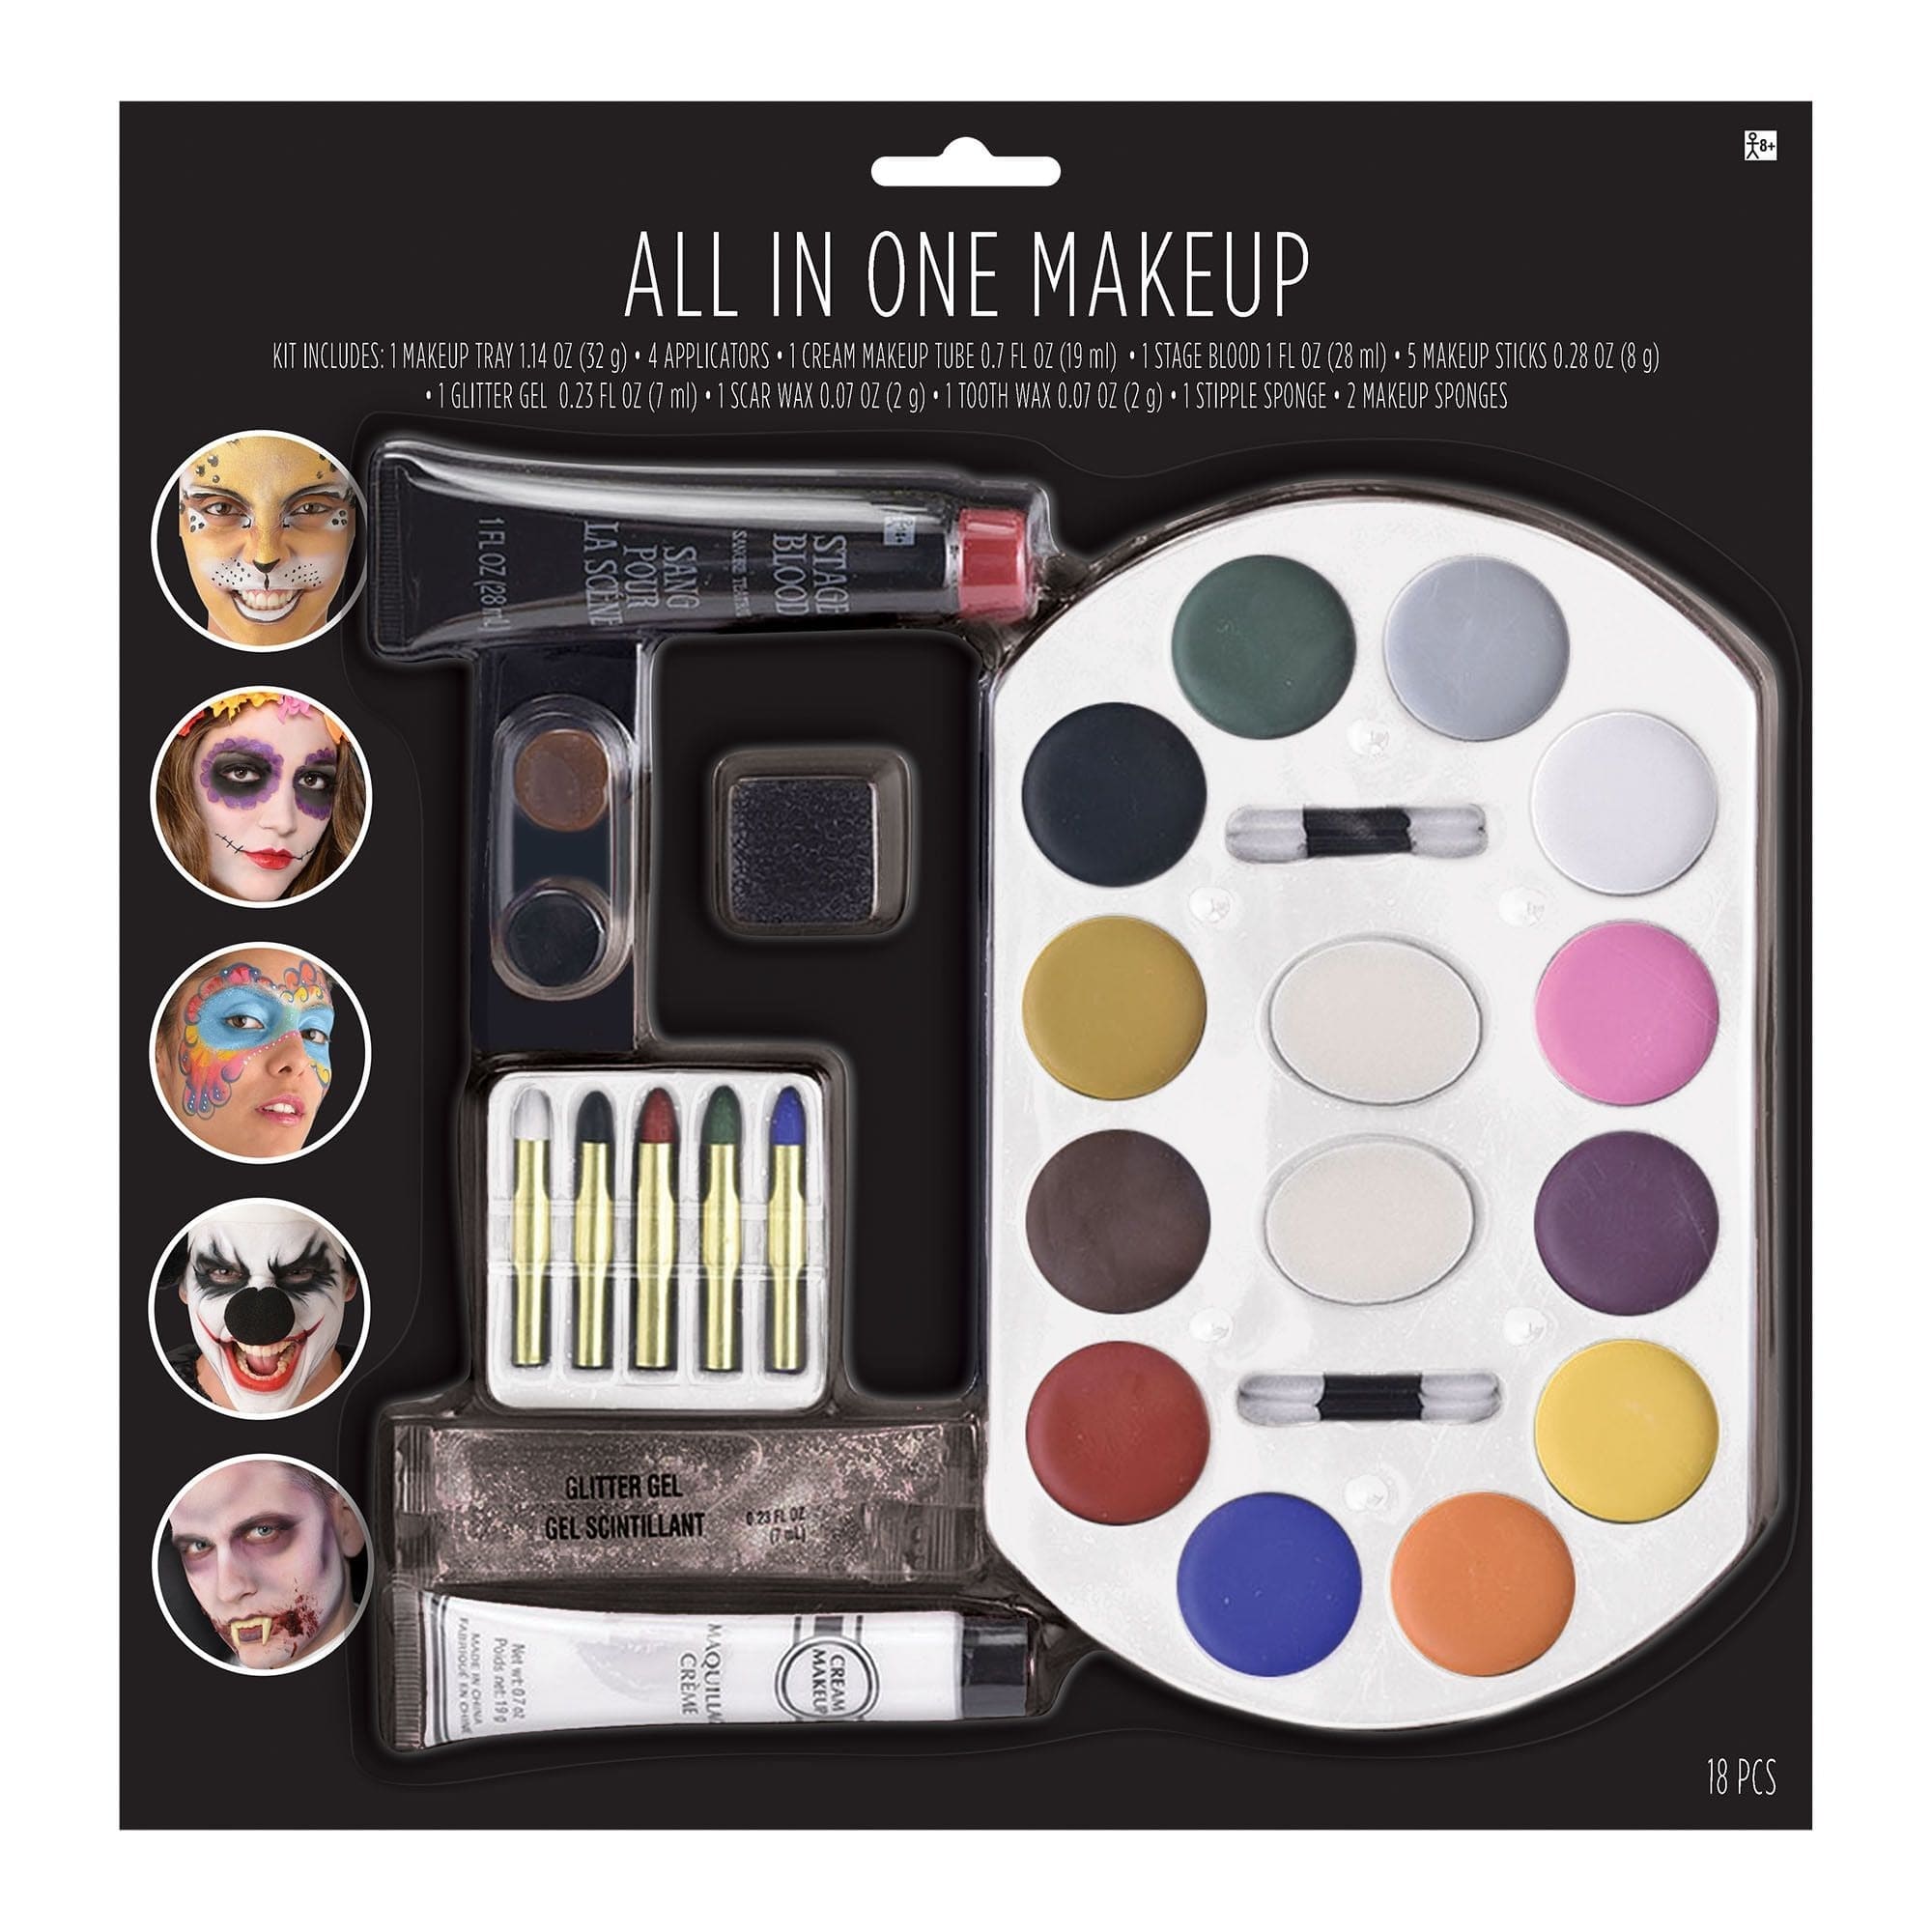 Amscan COSTUMES: MAKE-UP All In One Makeup Kit